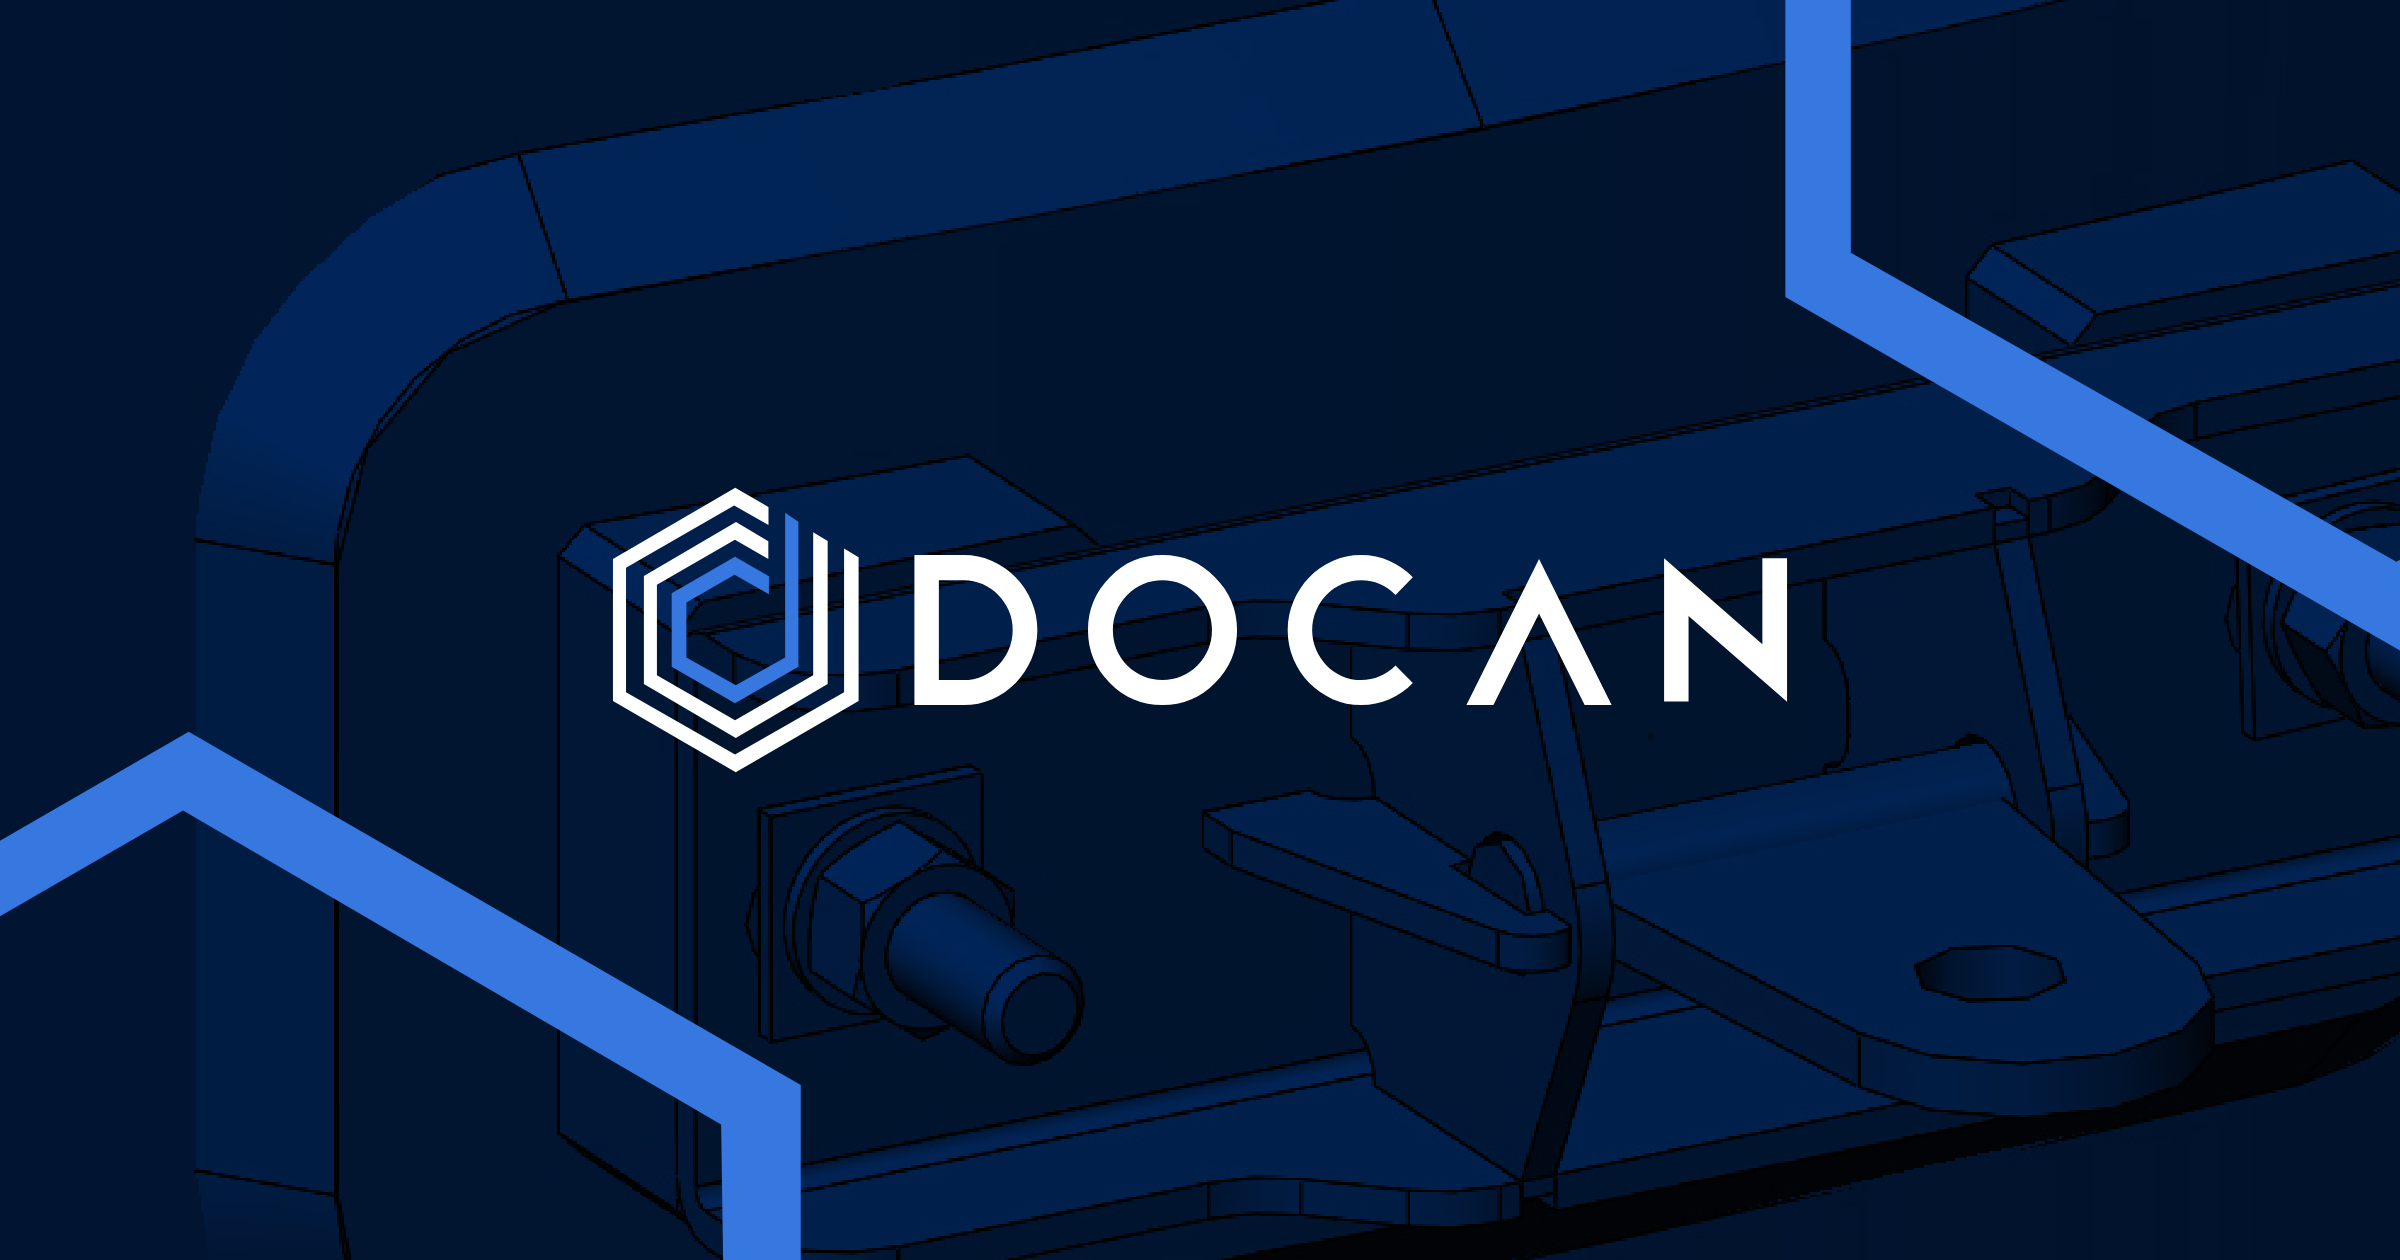 Why make DOCAN your engineering consulting firm of choice?